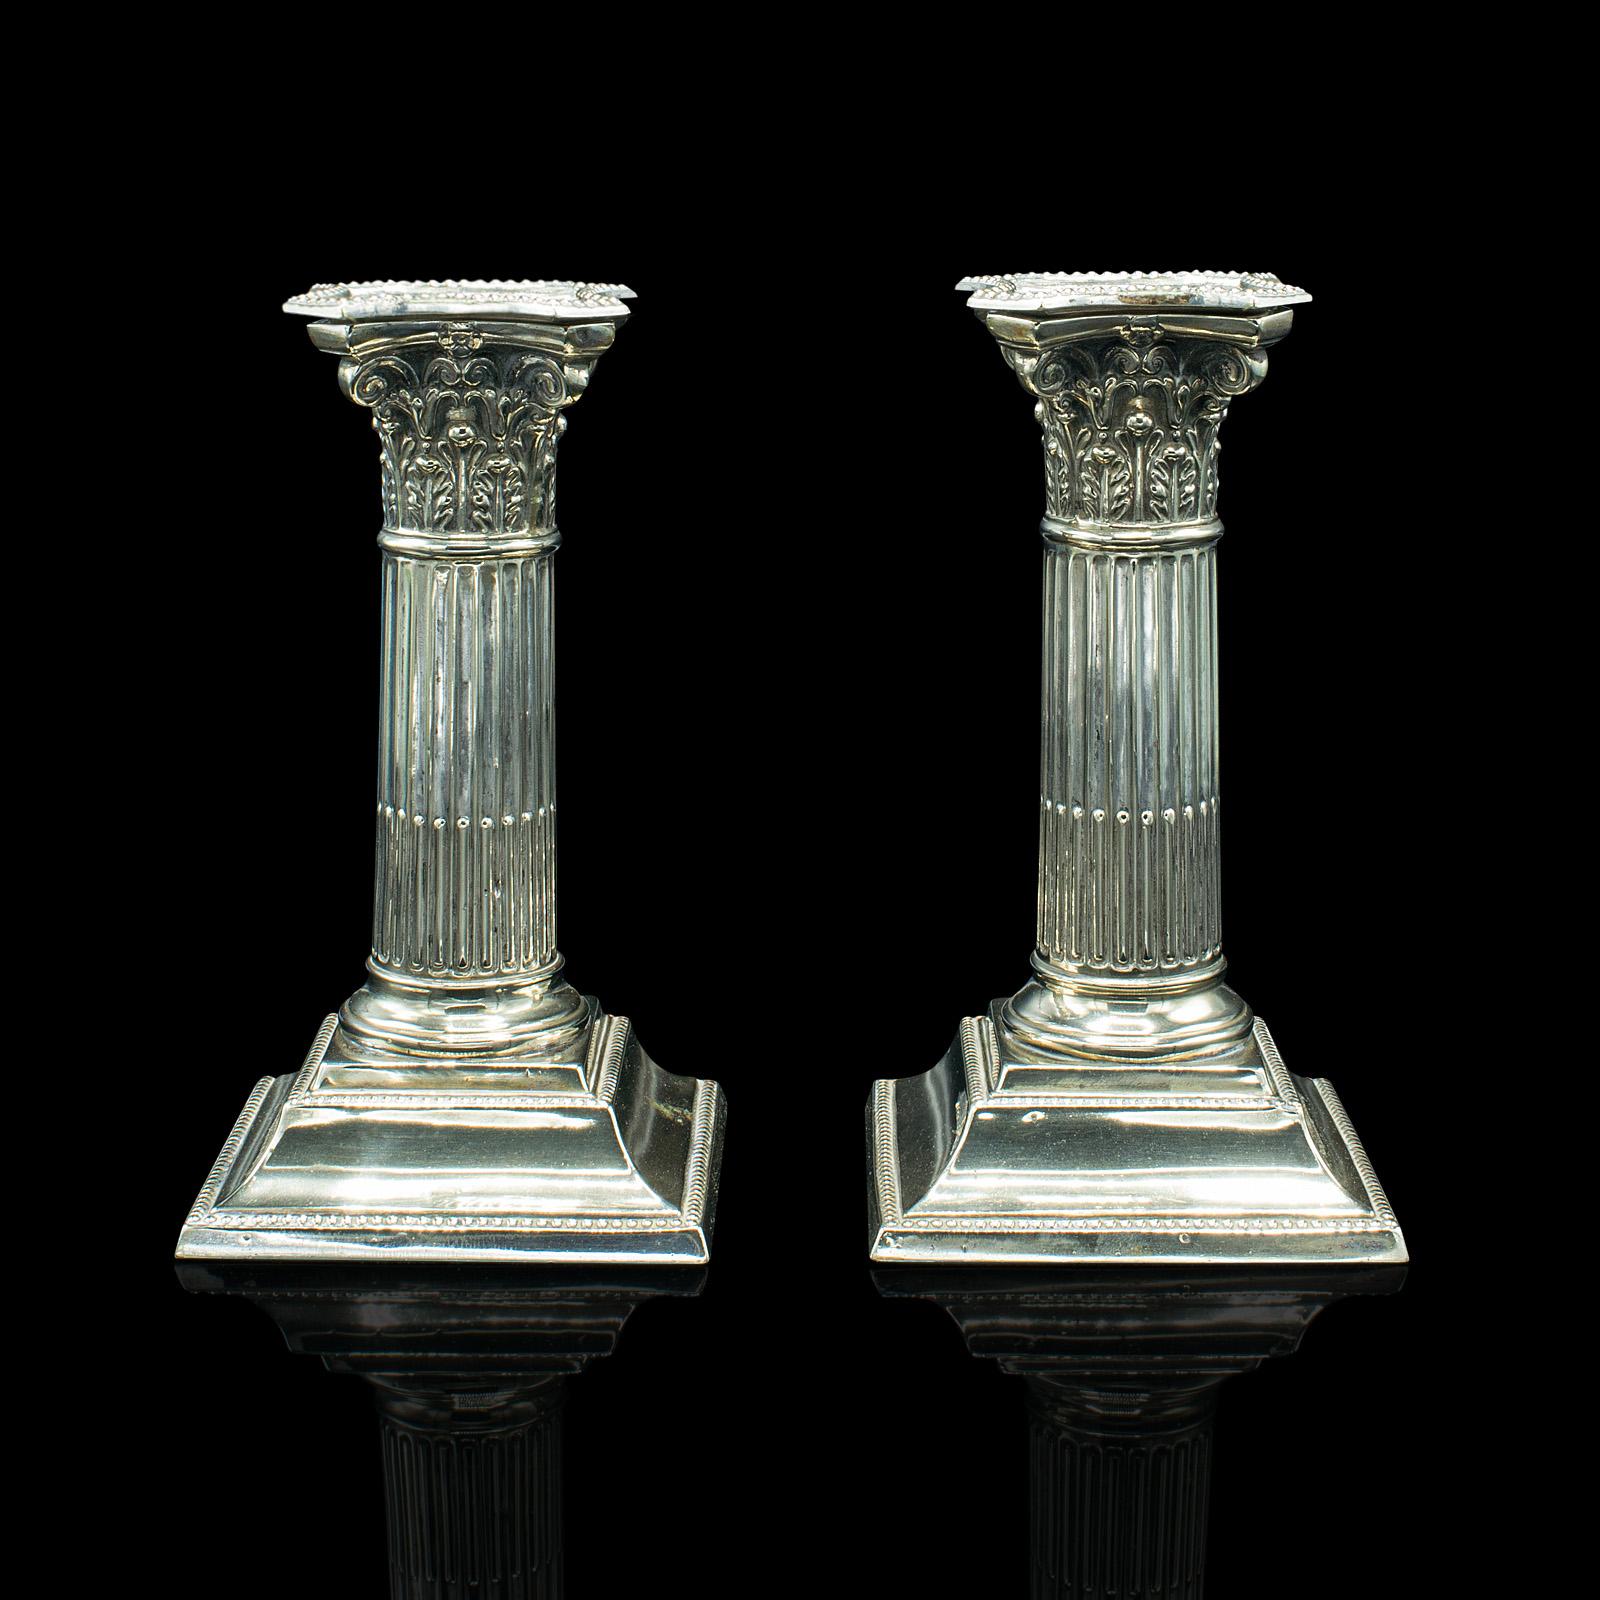 This is a pair of antique decorative candlesticks. An Italian, silver plate Grand Tour candle holder, dating to the mid Victorian period, circa 1860.

Delightfully classical taste in the form of Corinthian columns
Displaying a desirable aged